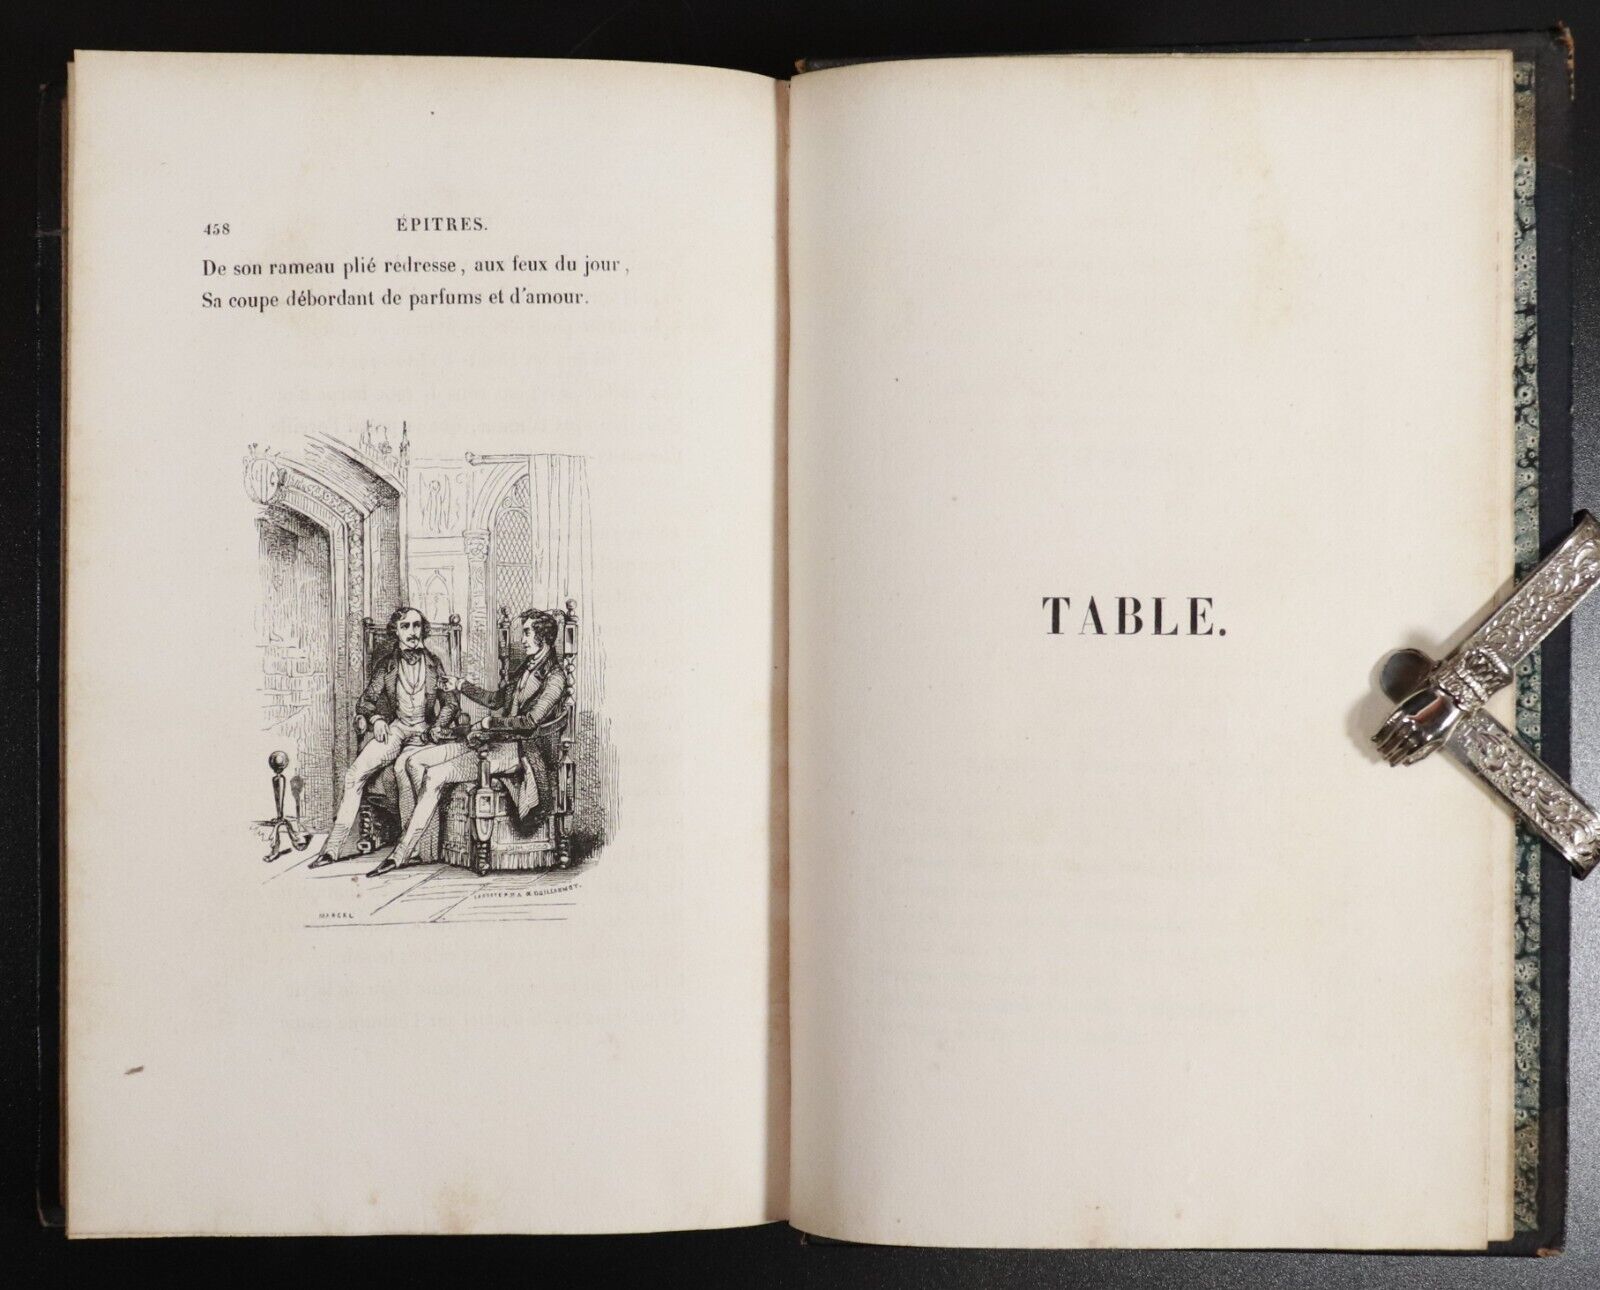 1837 Oeuvres Completes De Lamartine Antiquarian French Literature Book